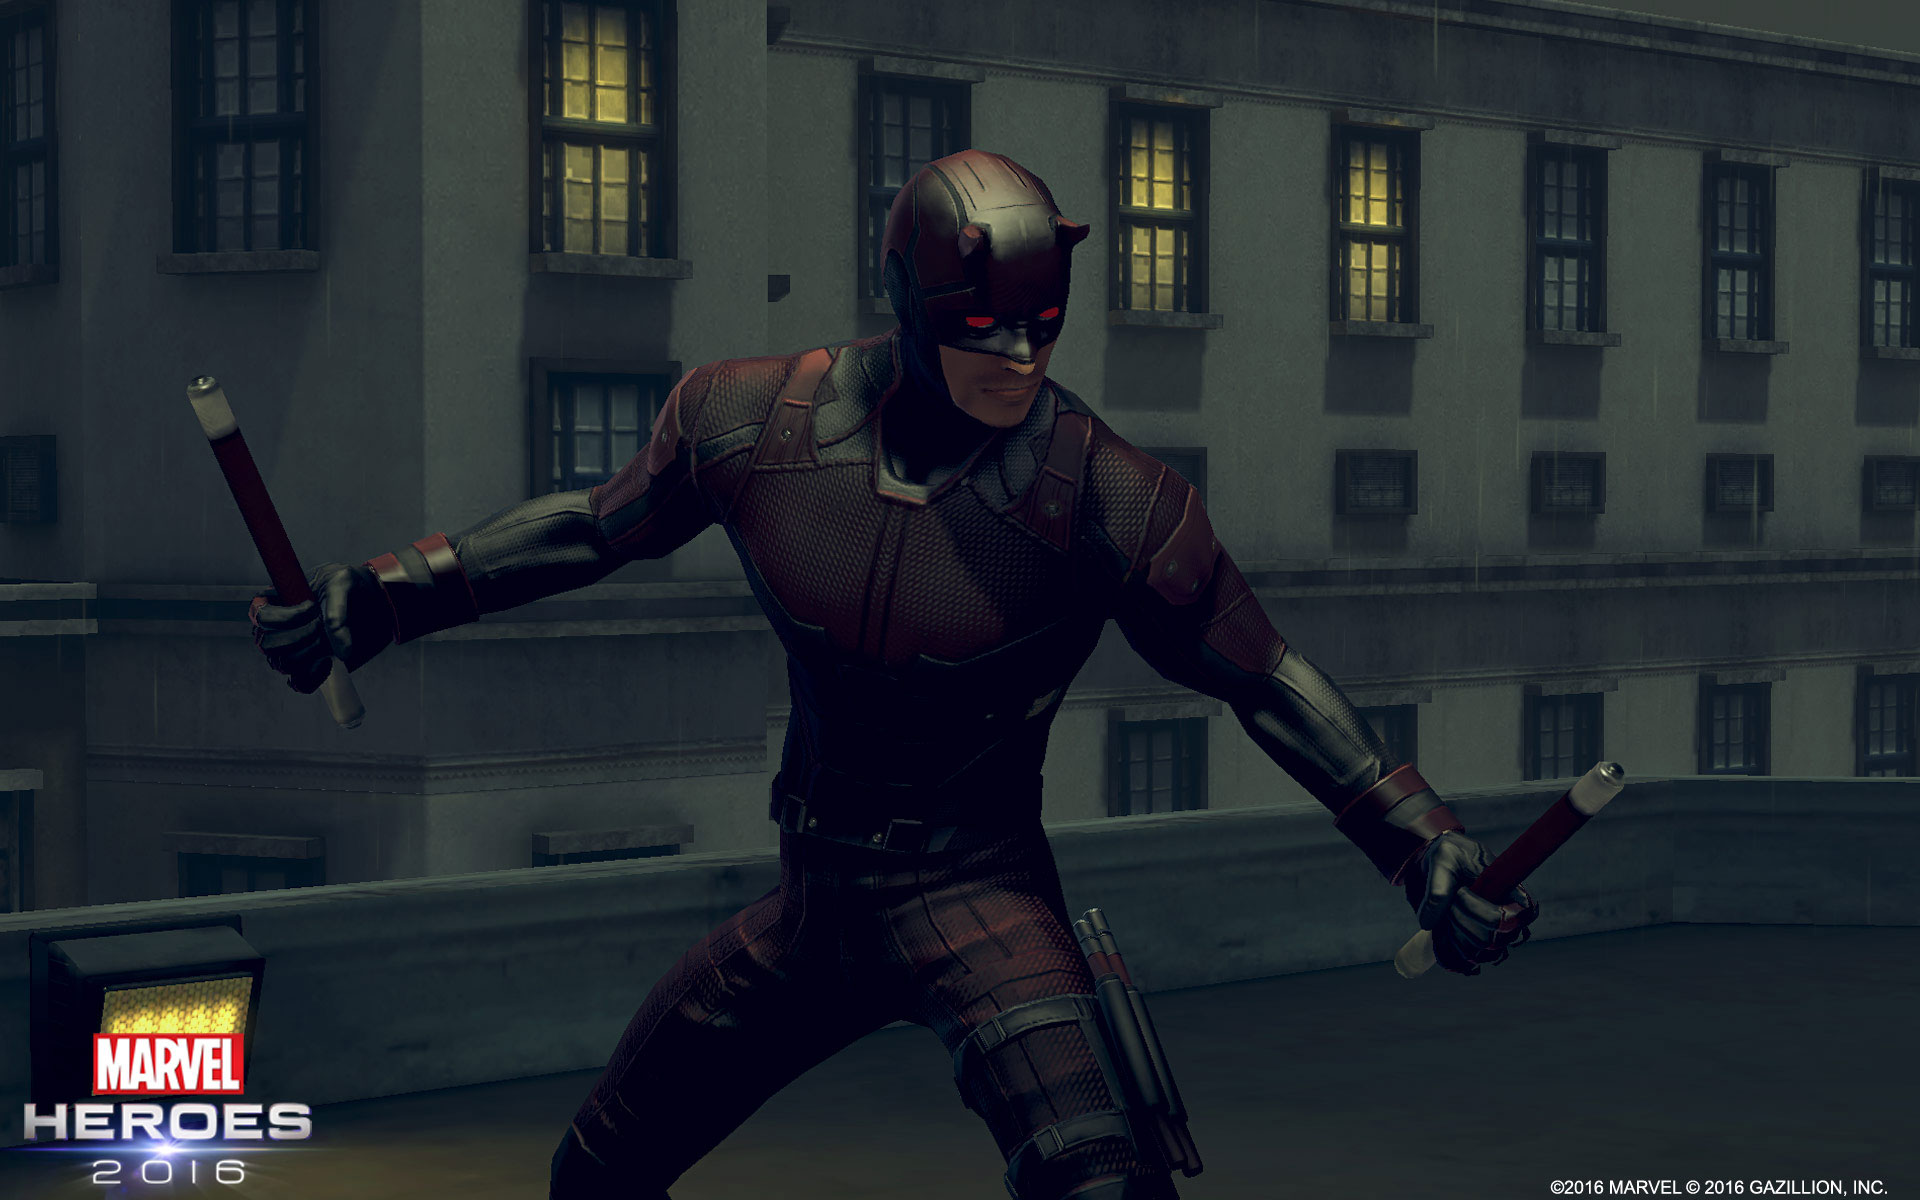 Marvel Heroes Is A Great Place To Work Out Your Post-Daredevil Season Two Frustrations